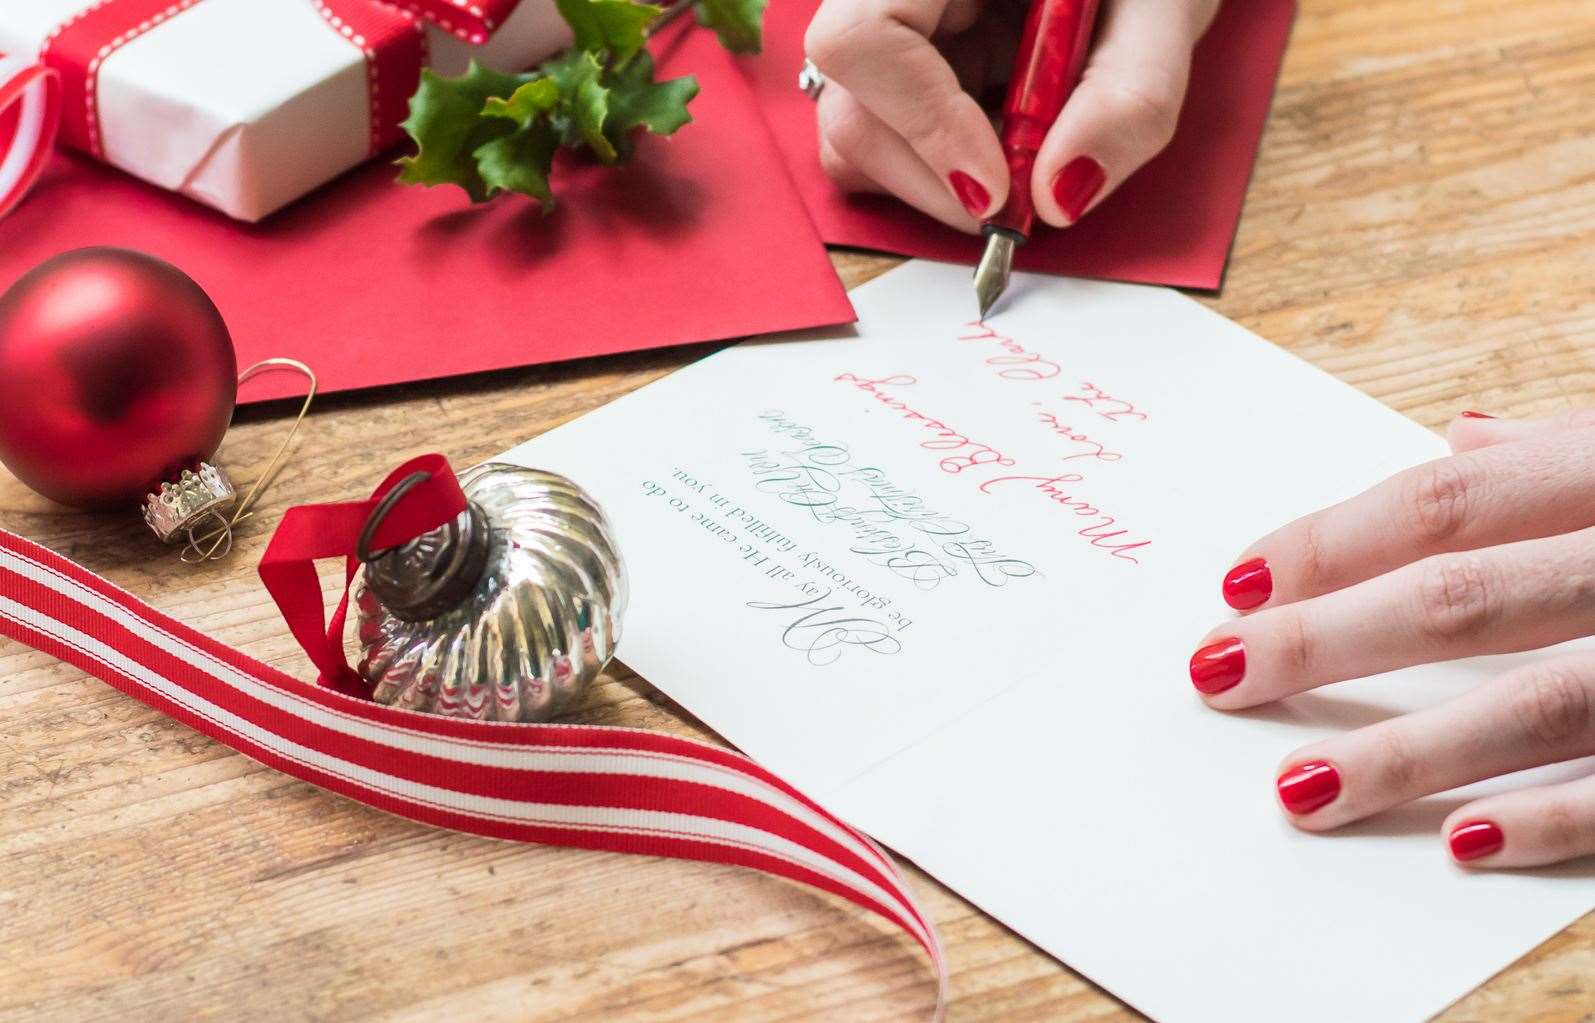 A message or card can bring so much cheer. Stock image